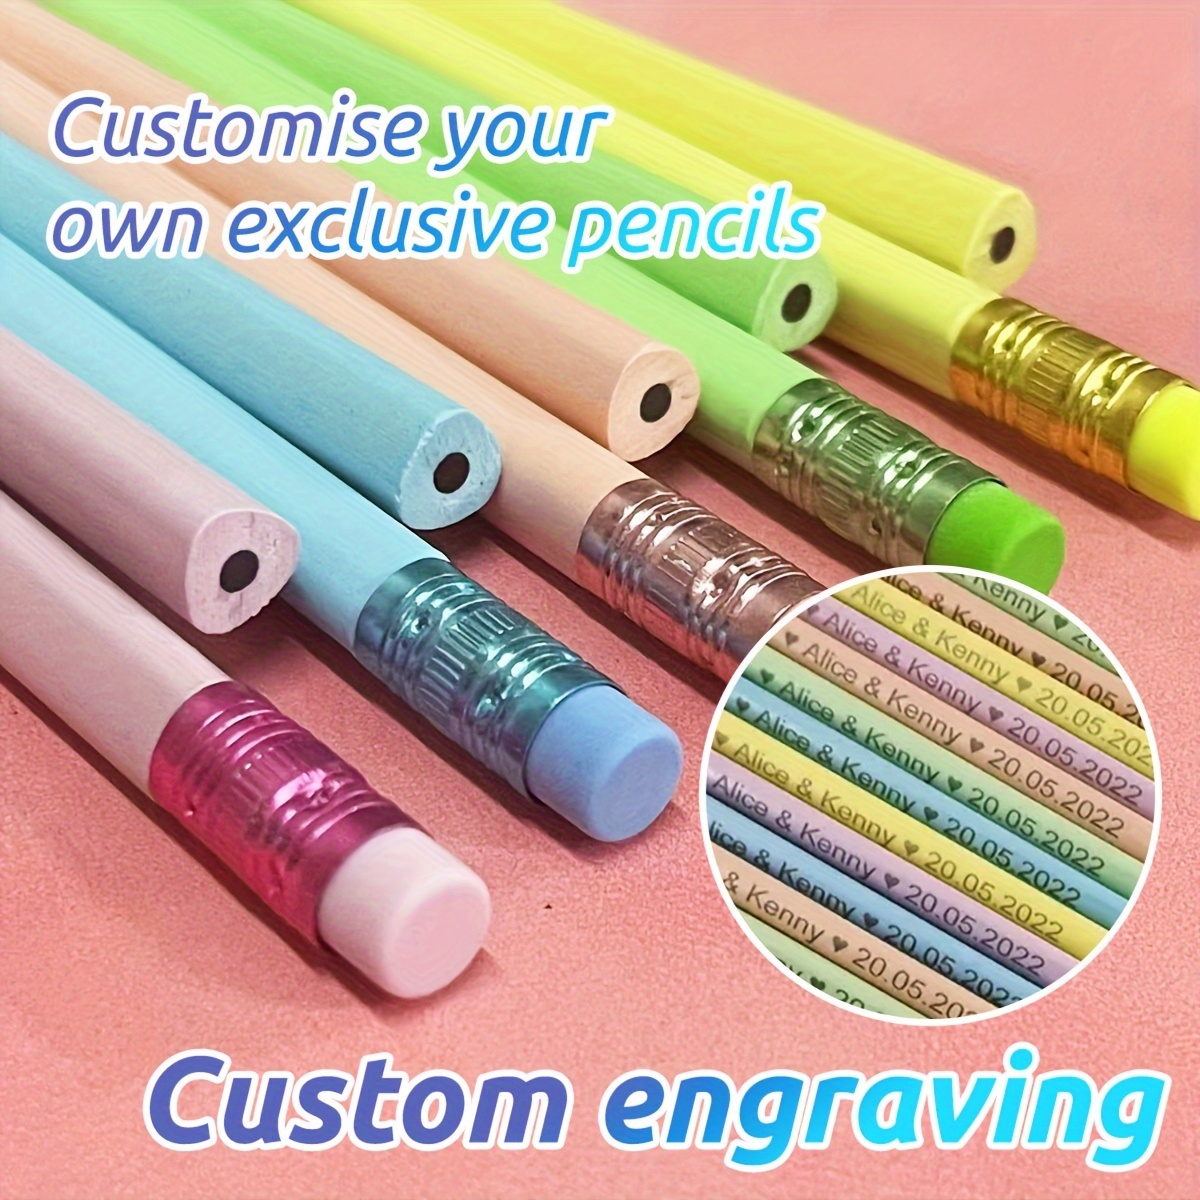 

Customized Products: 5pcs/45pcs/120pcs, Light Colors, Laser Engraved Personalized Words And Sentences, Colorful Wooden Pencils For Drawing, Learning And Writing, Stationery, Souvenirs, Gifts